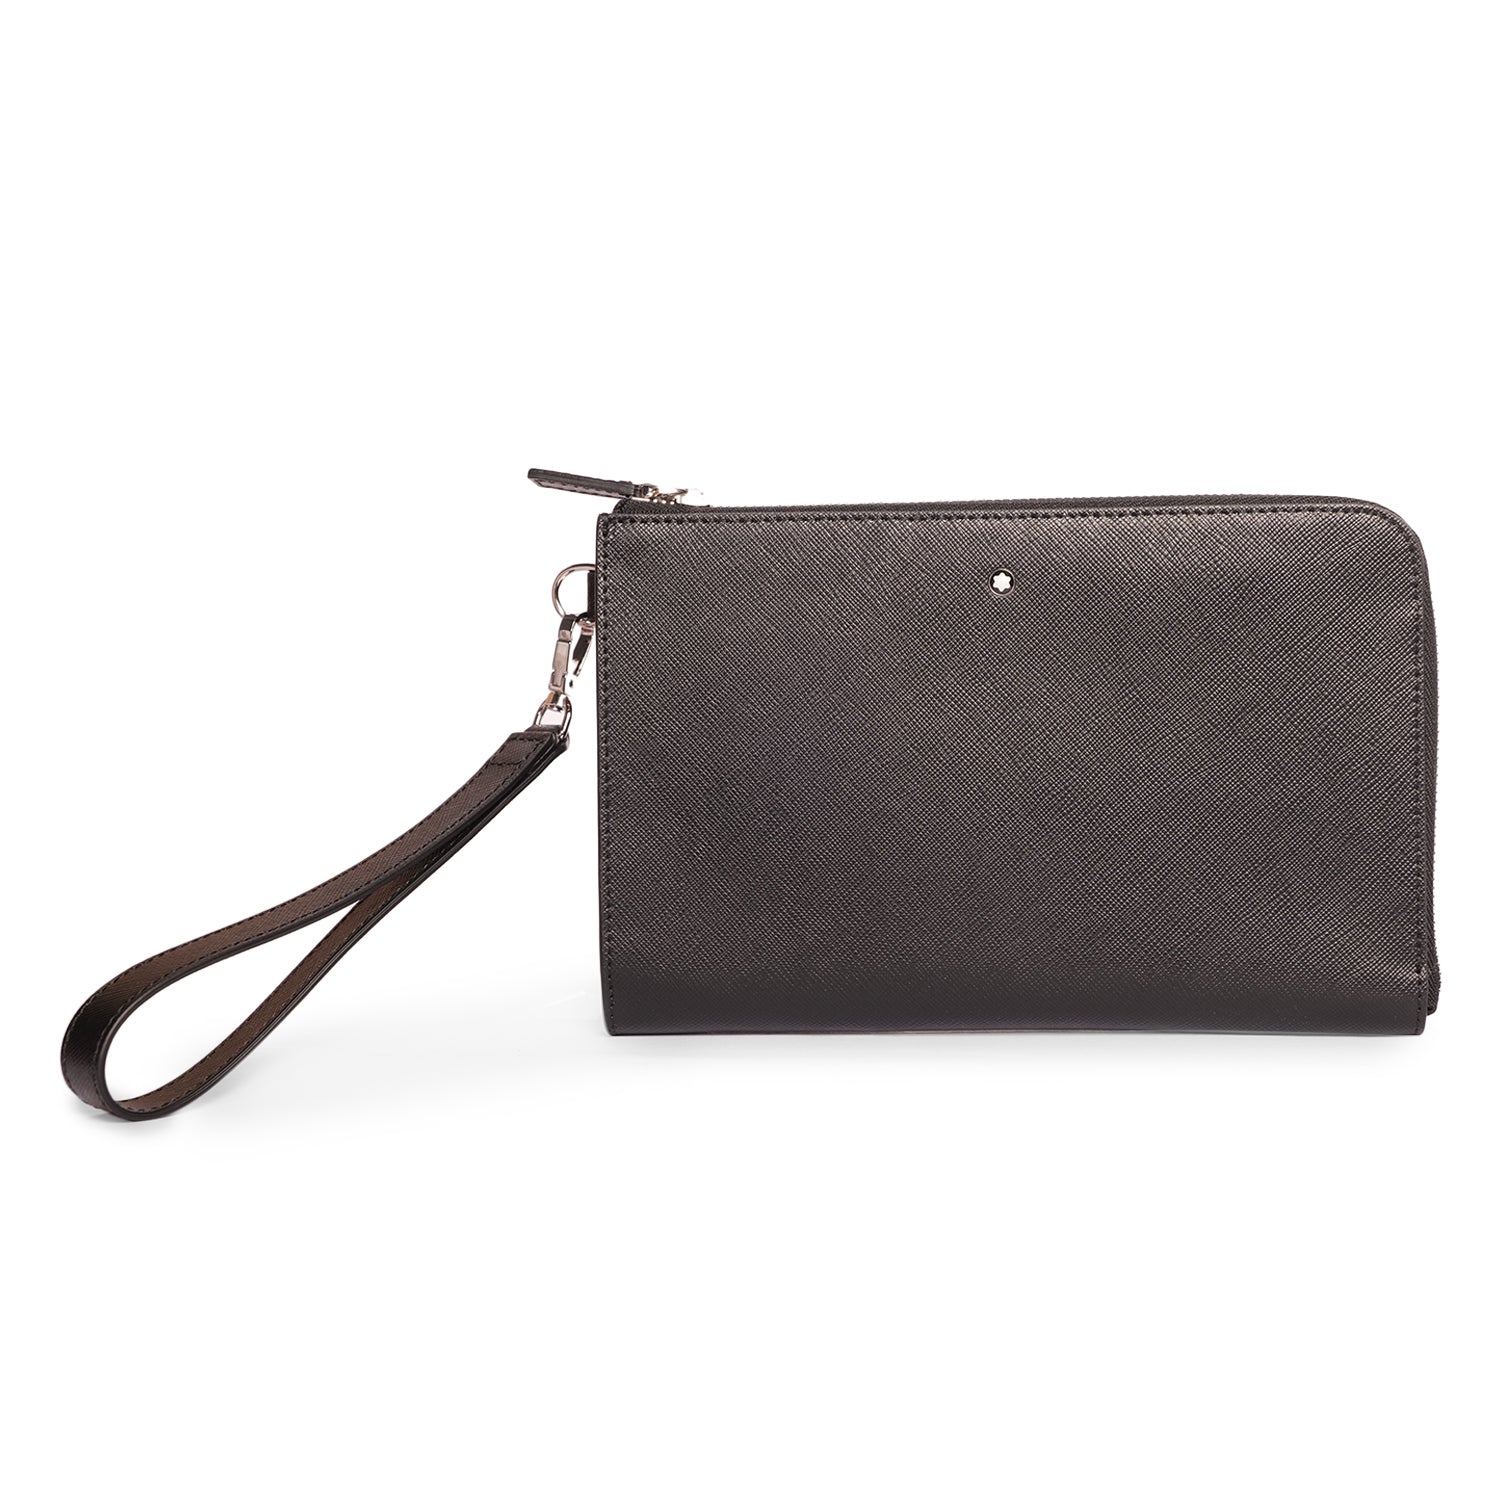 MONT BLANC SMALL POUCH IN BLACK